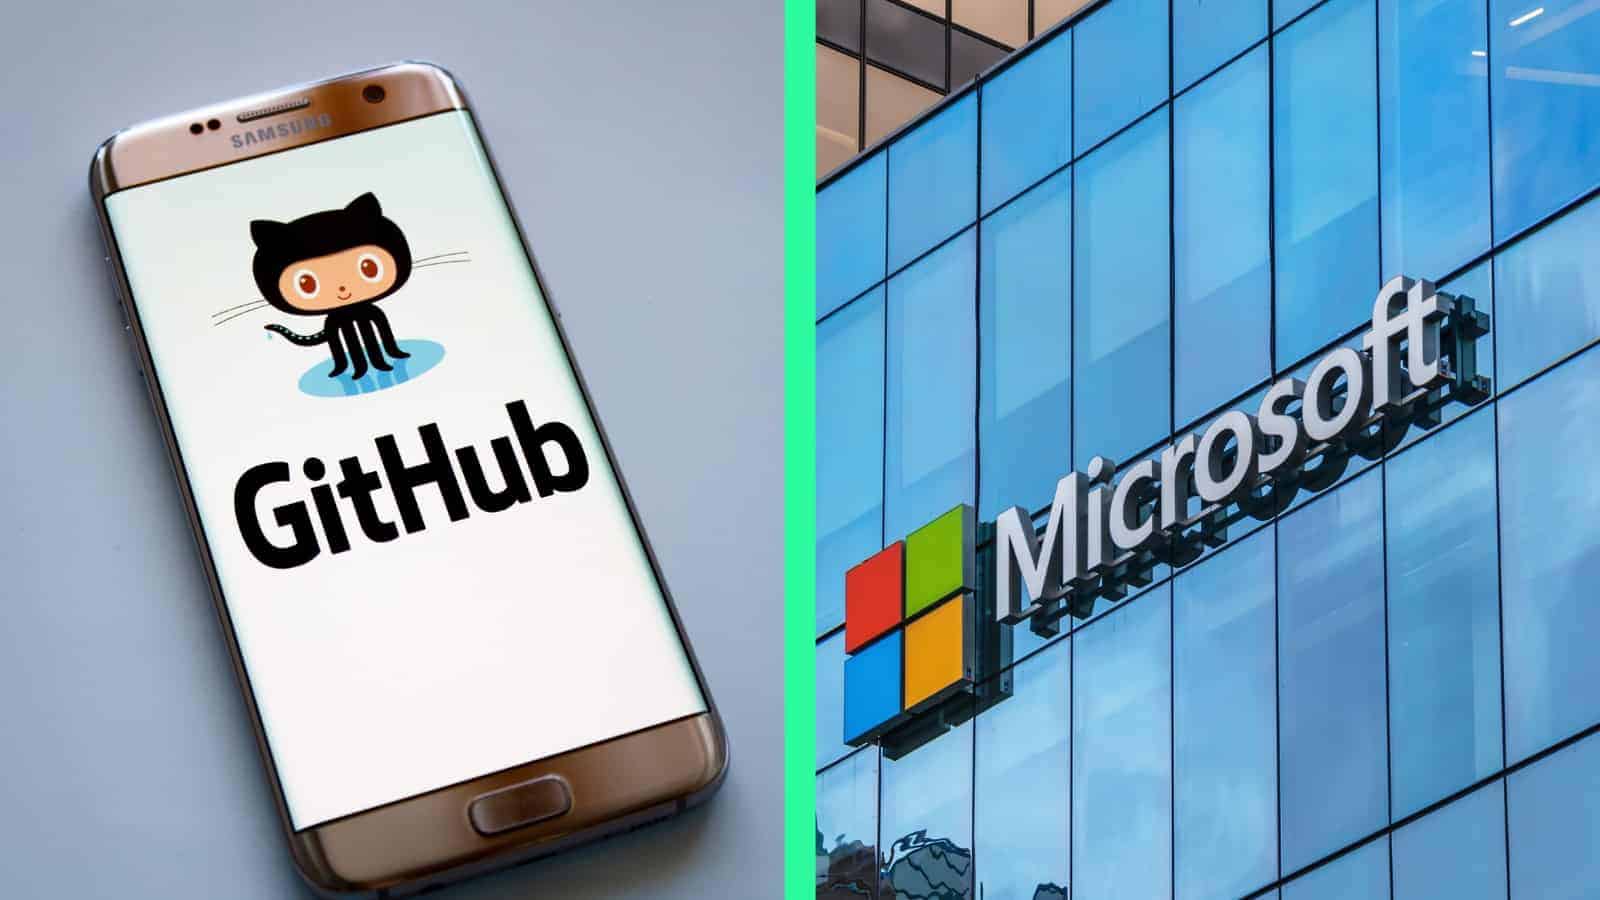 Microsoft Acquires GitHub, a Community of 28M Developers, for $7.5B